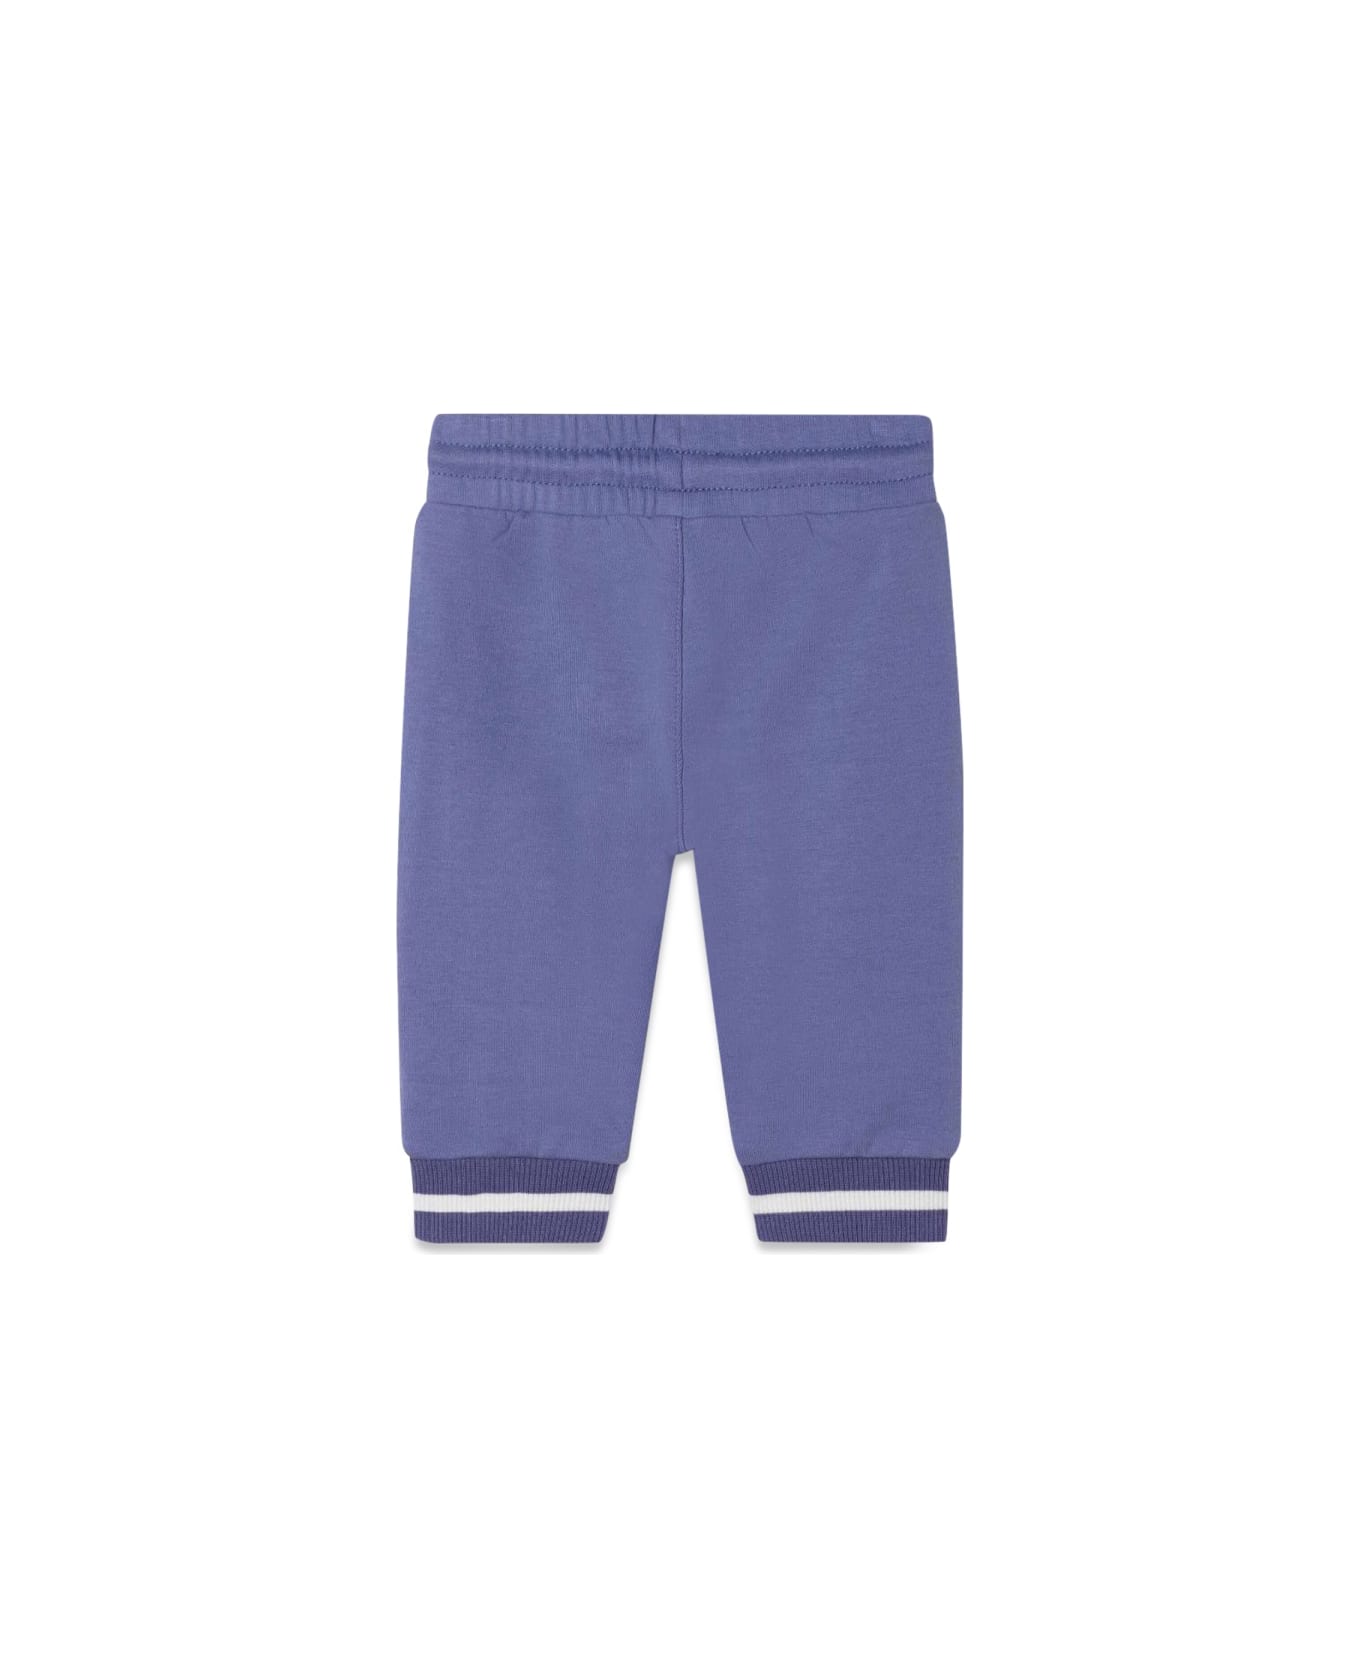 Kenzo Kids Ml T-shirt And Jogger Set - BABY BLUE ボディスーツ＆セットアップ